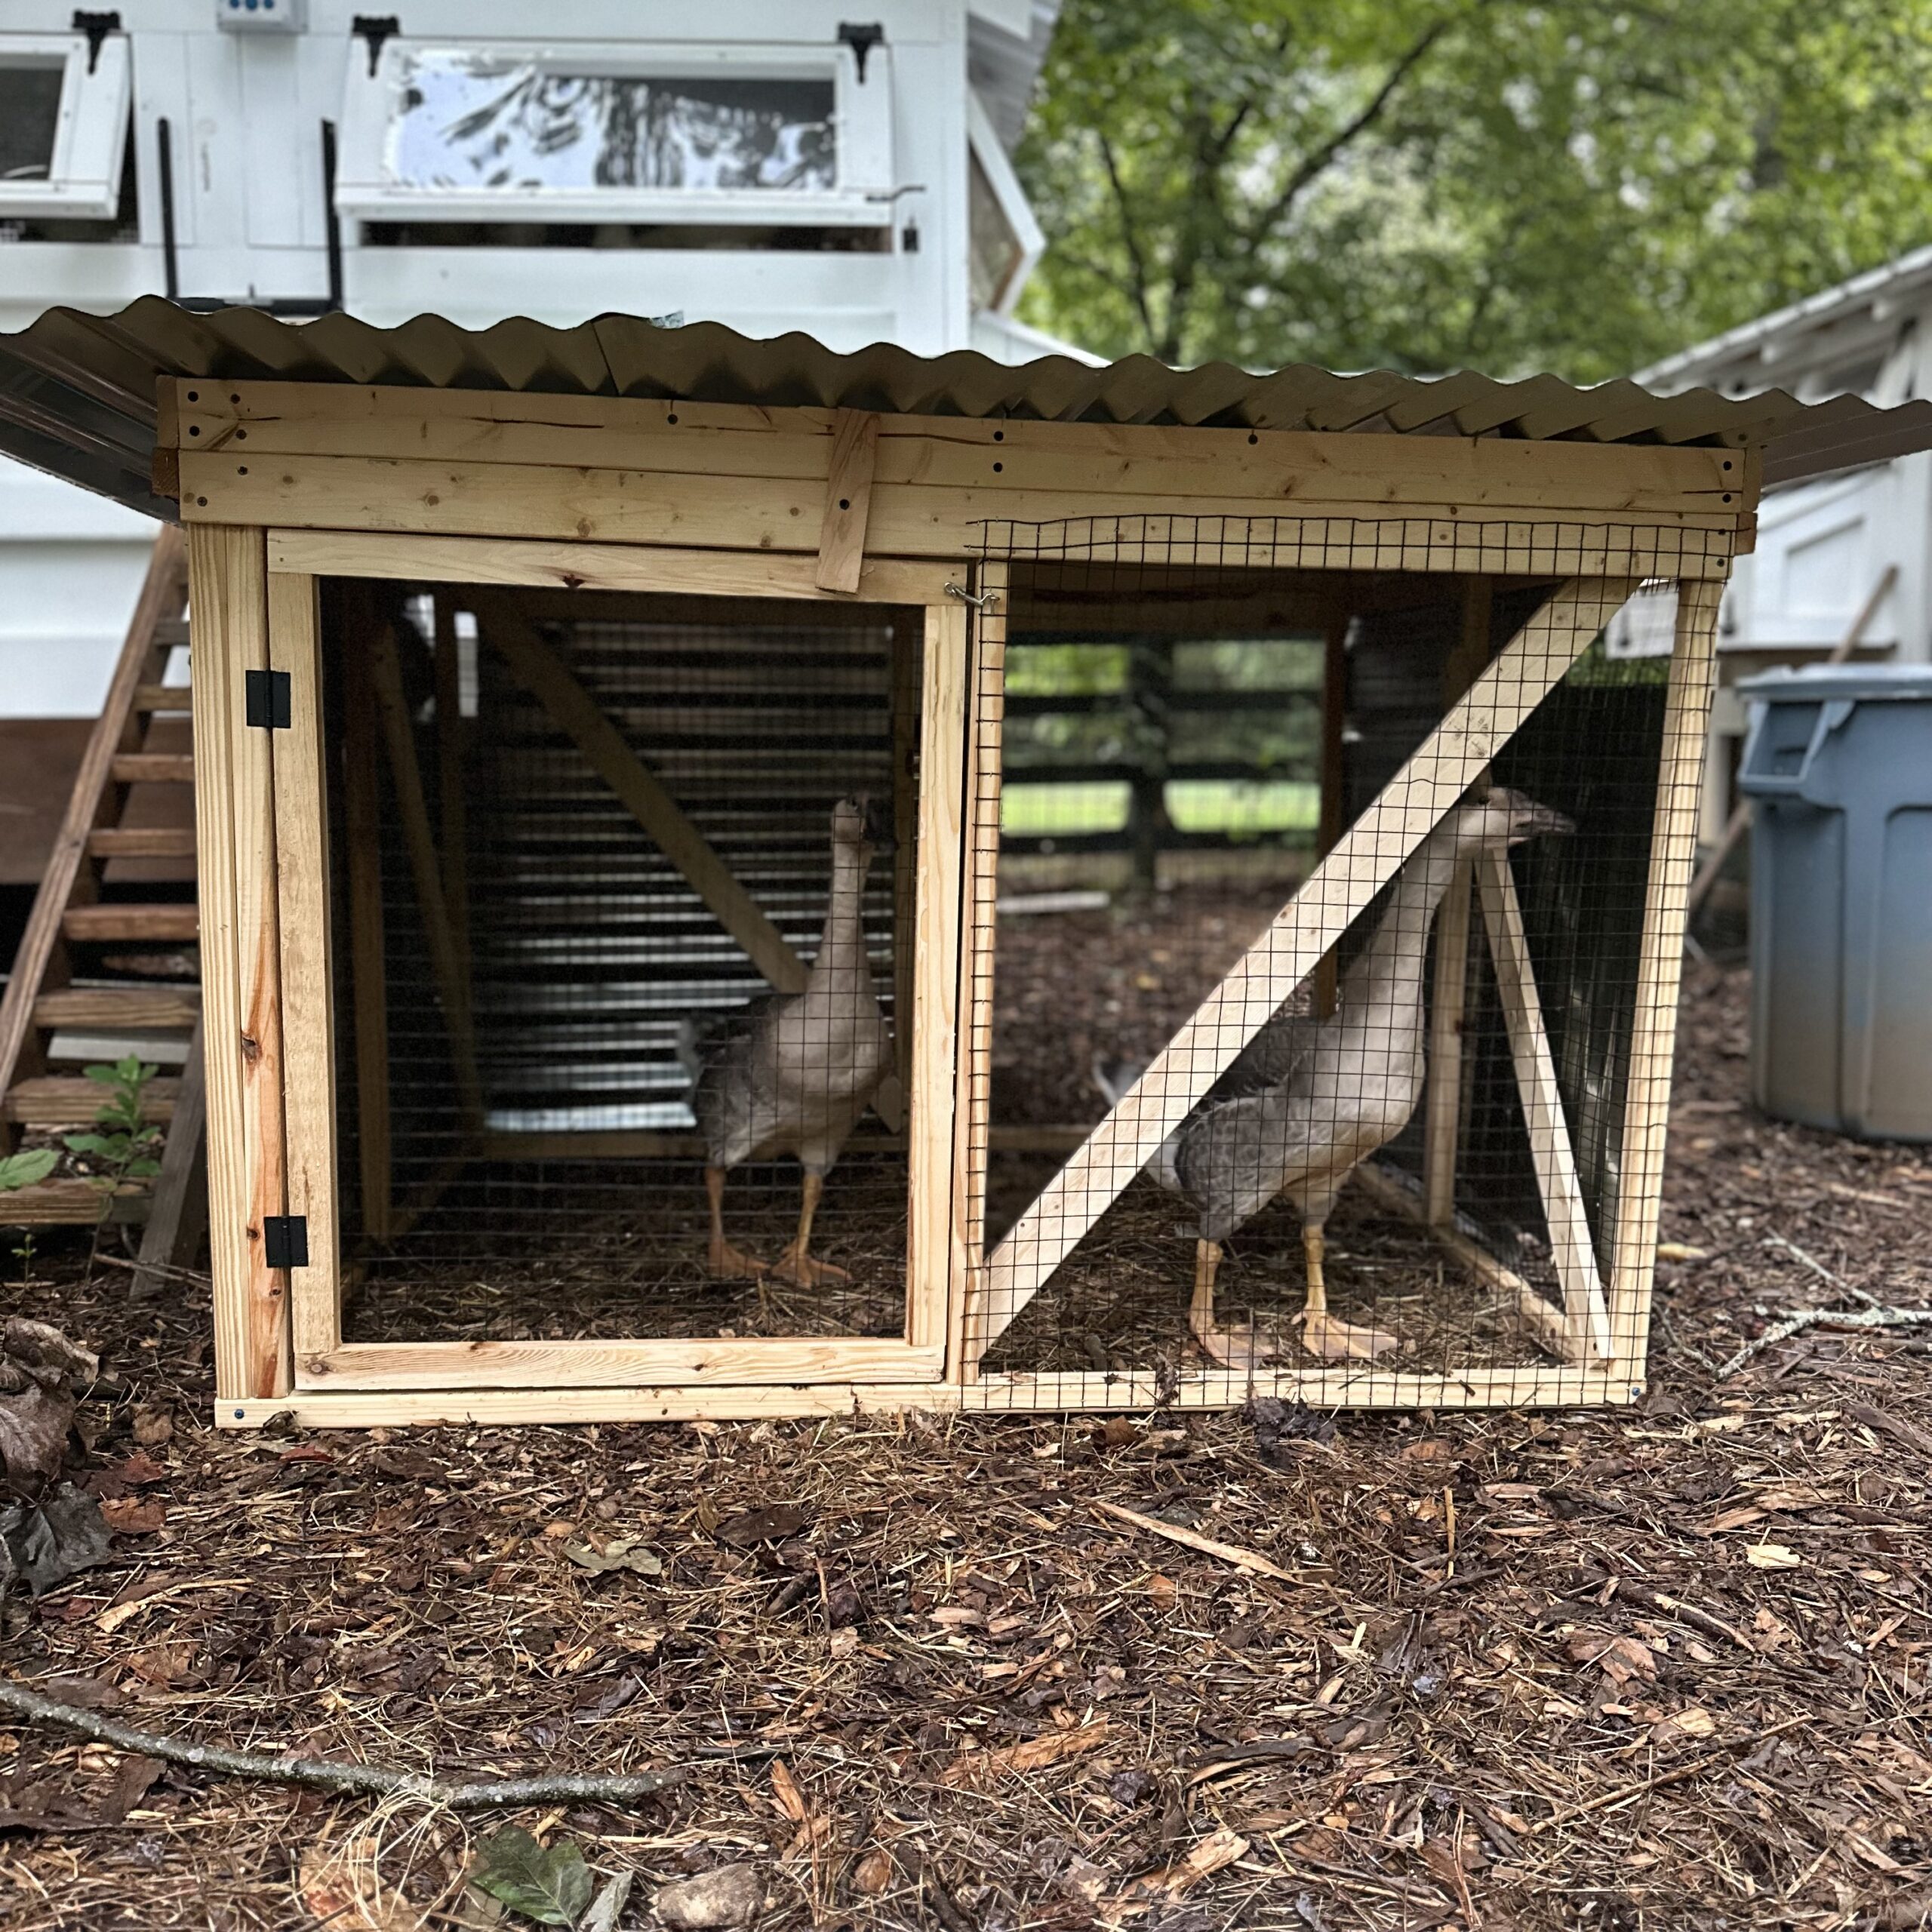 I built a pen and placed it right in front of the chicken coop to keep our two geese safe at night